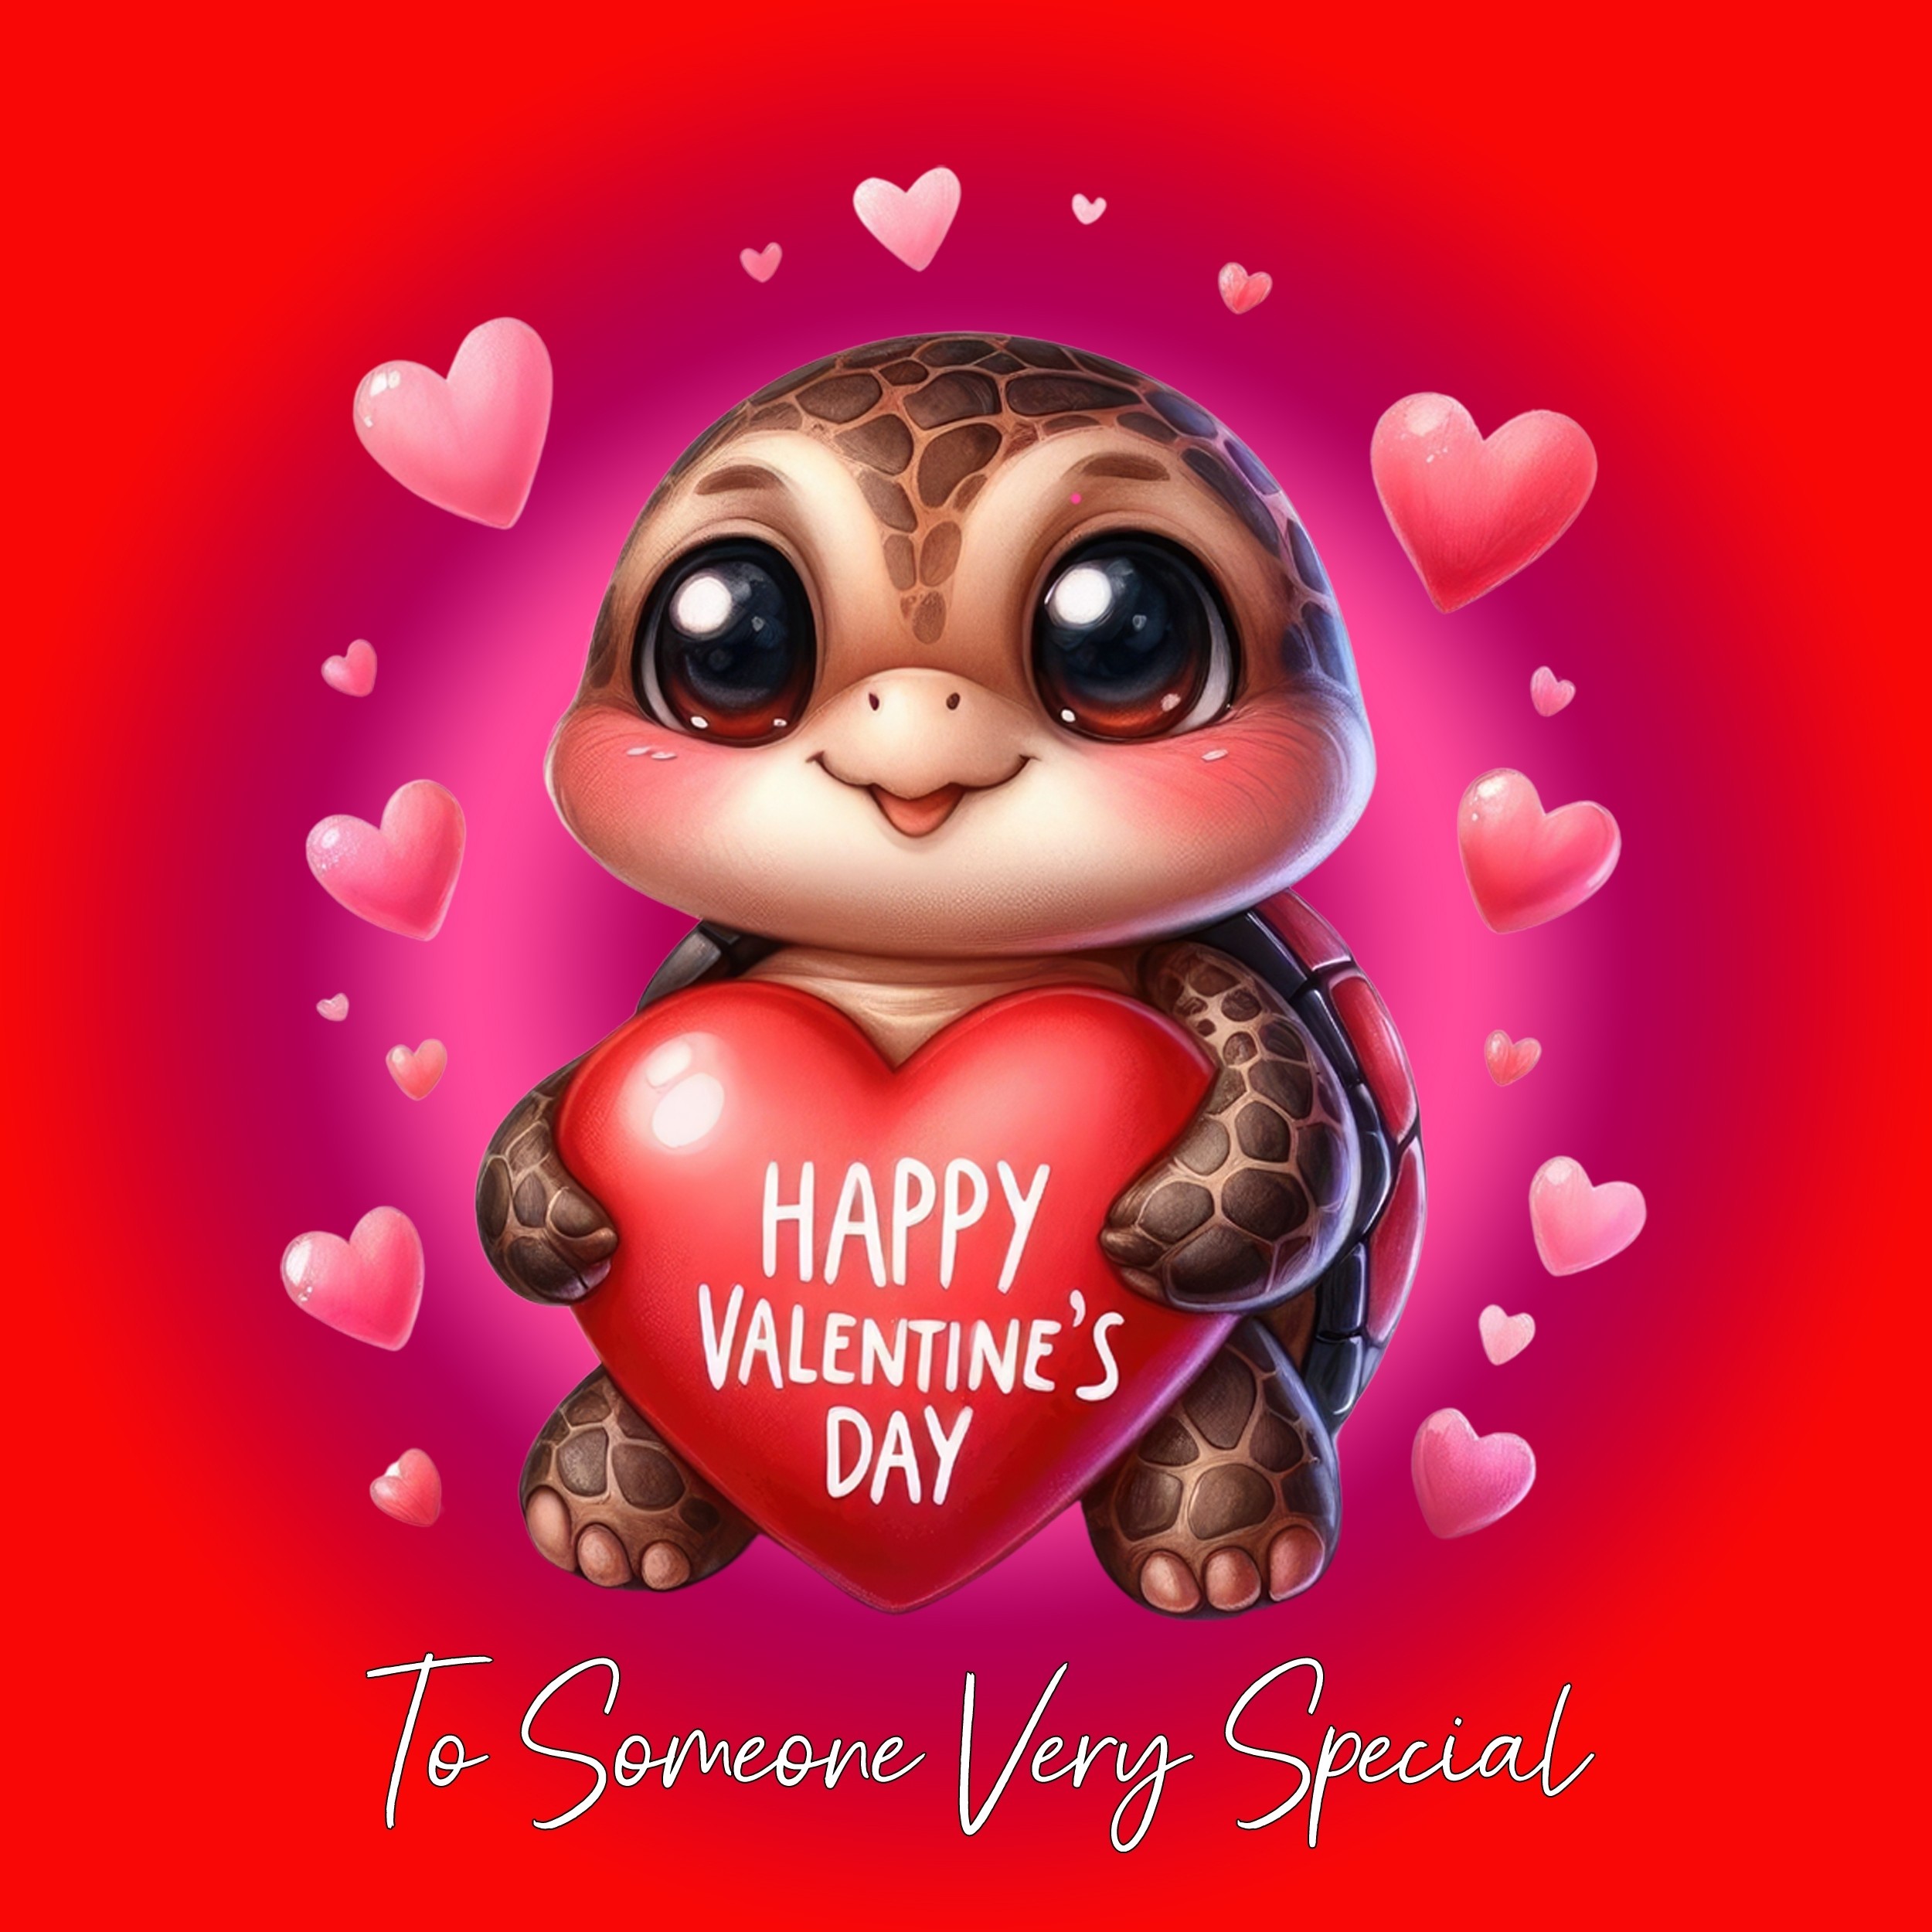 Valentines Day Square Card for Wonderful Someone (Turtle)